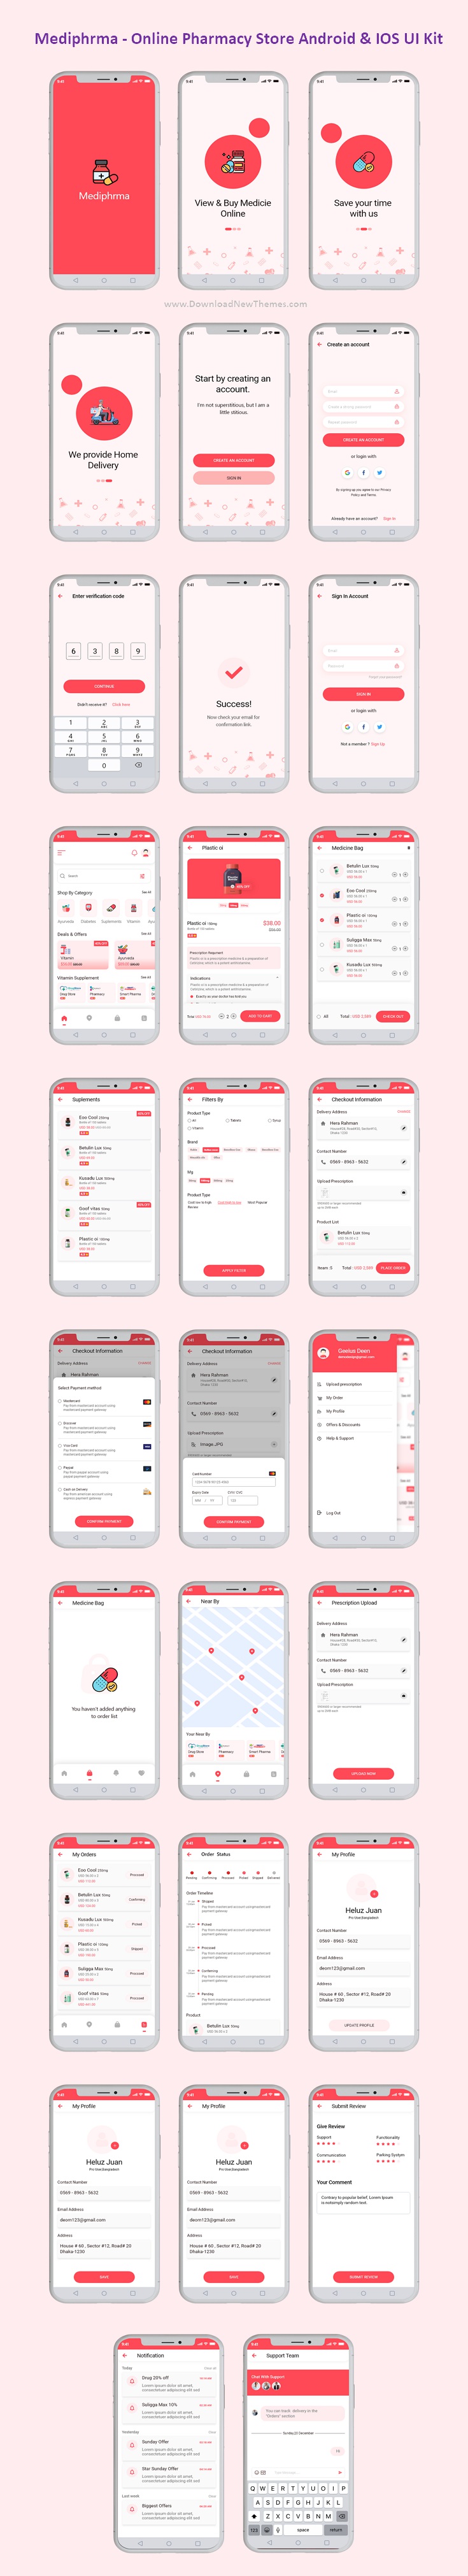 Online Pharmacy Store Android and IOS UI Kit